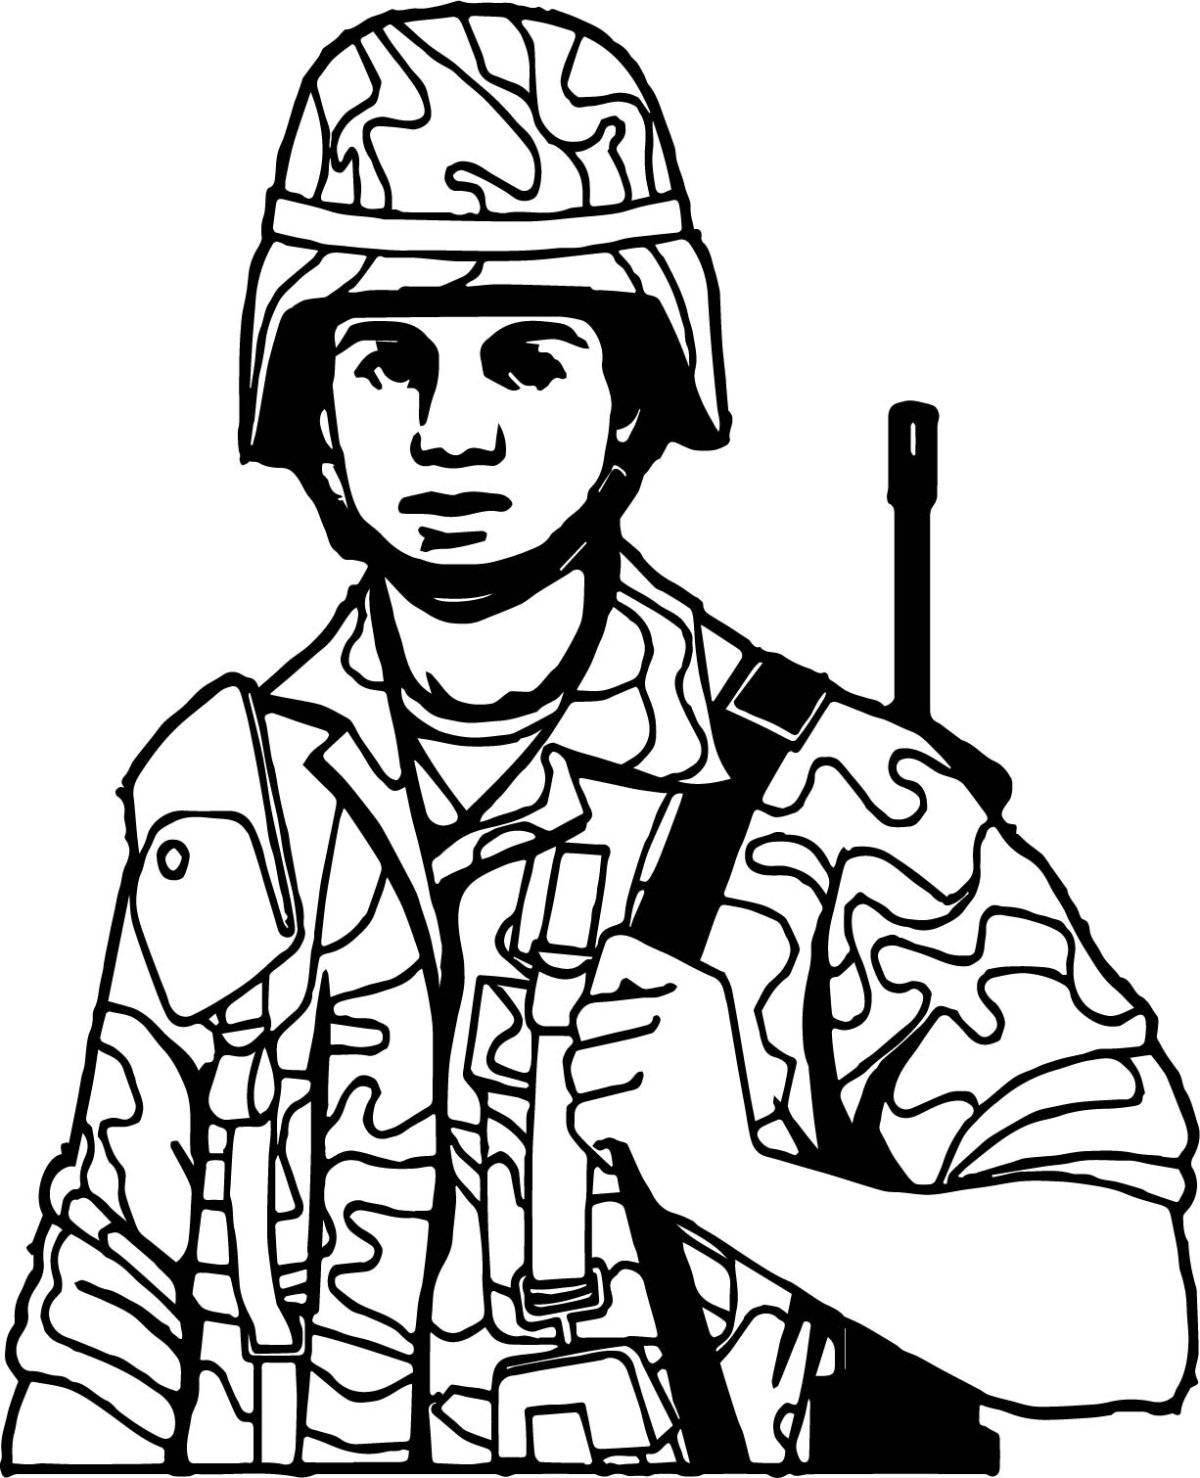 Elegant soldiers coloring pages for kids